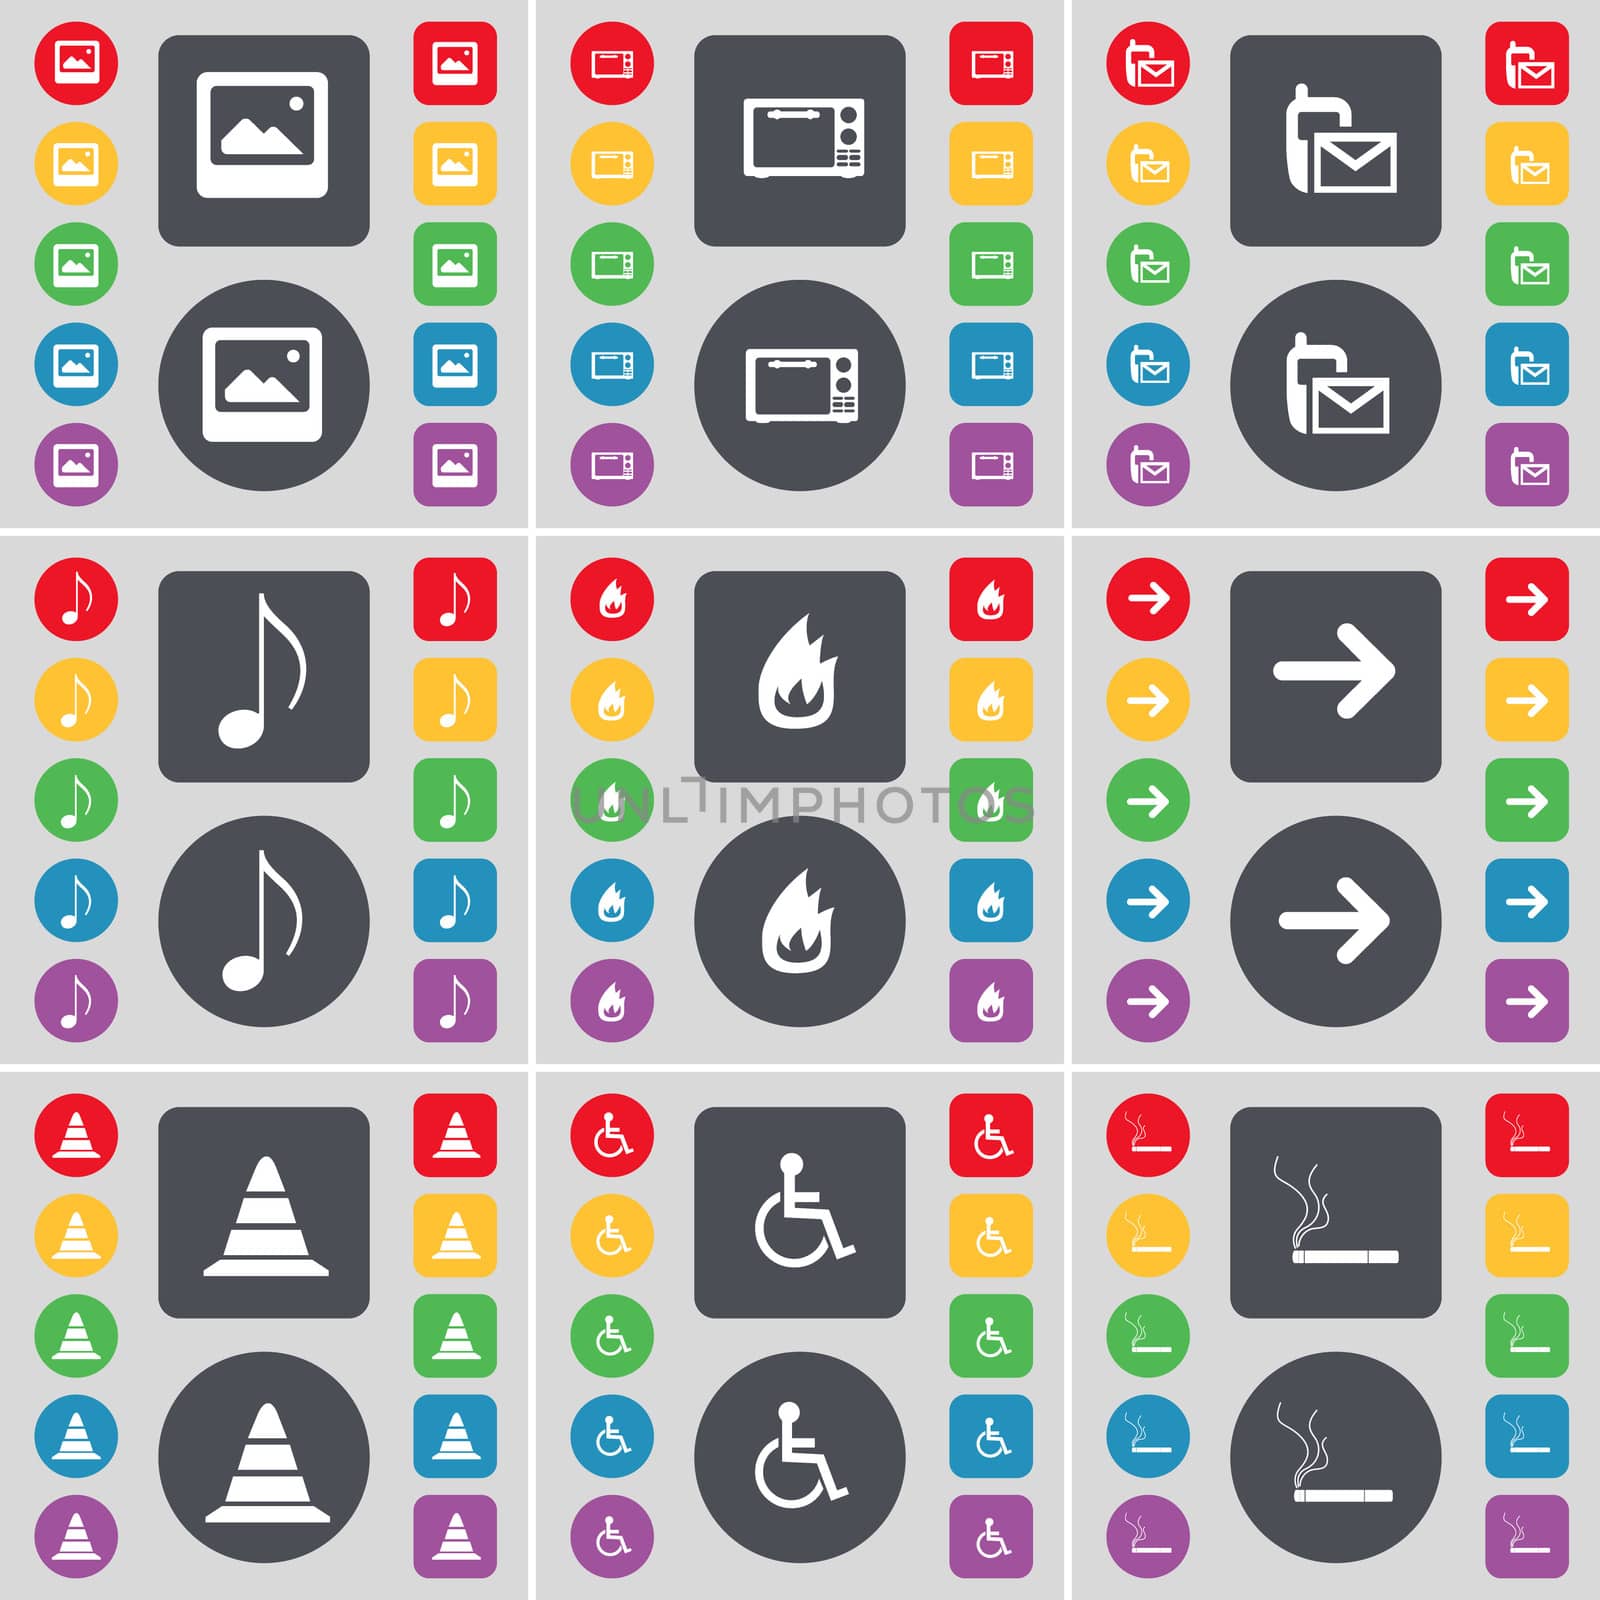 Window, Microwave, SMS, Note, Fire, Arrow right, Cone, Disabled person, Cigarette icon symbol. A large set of flat, colored buttons for your design.  by serhii_lohvyniuk